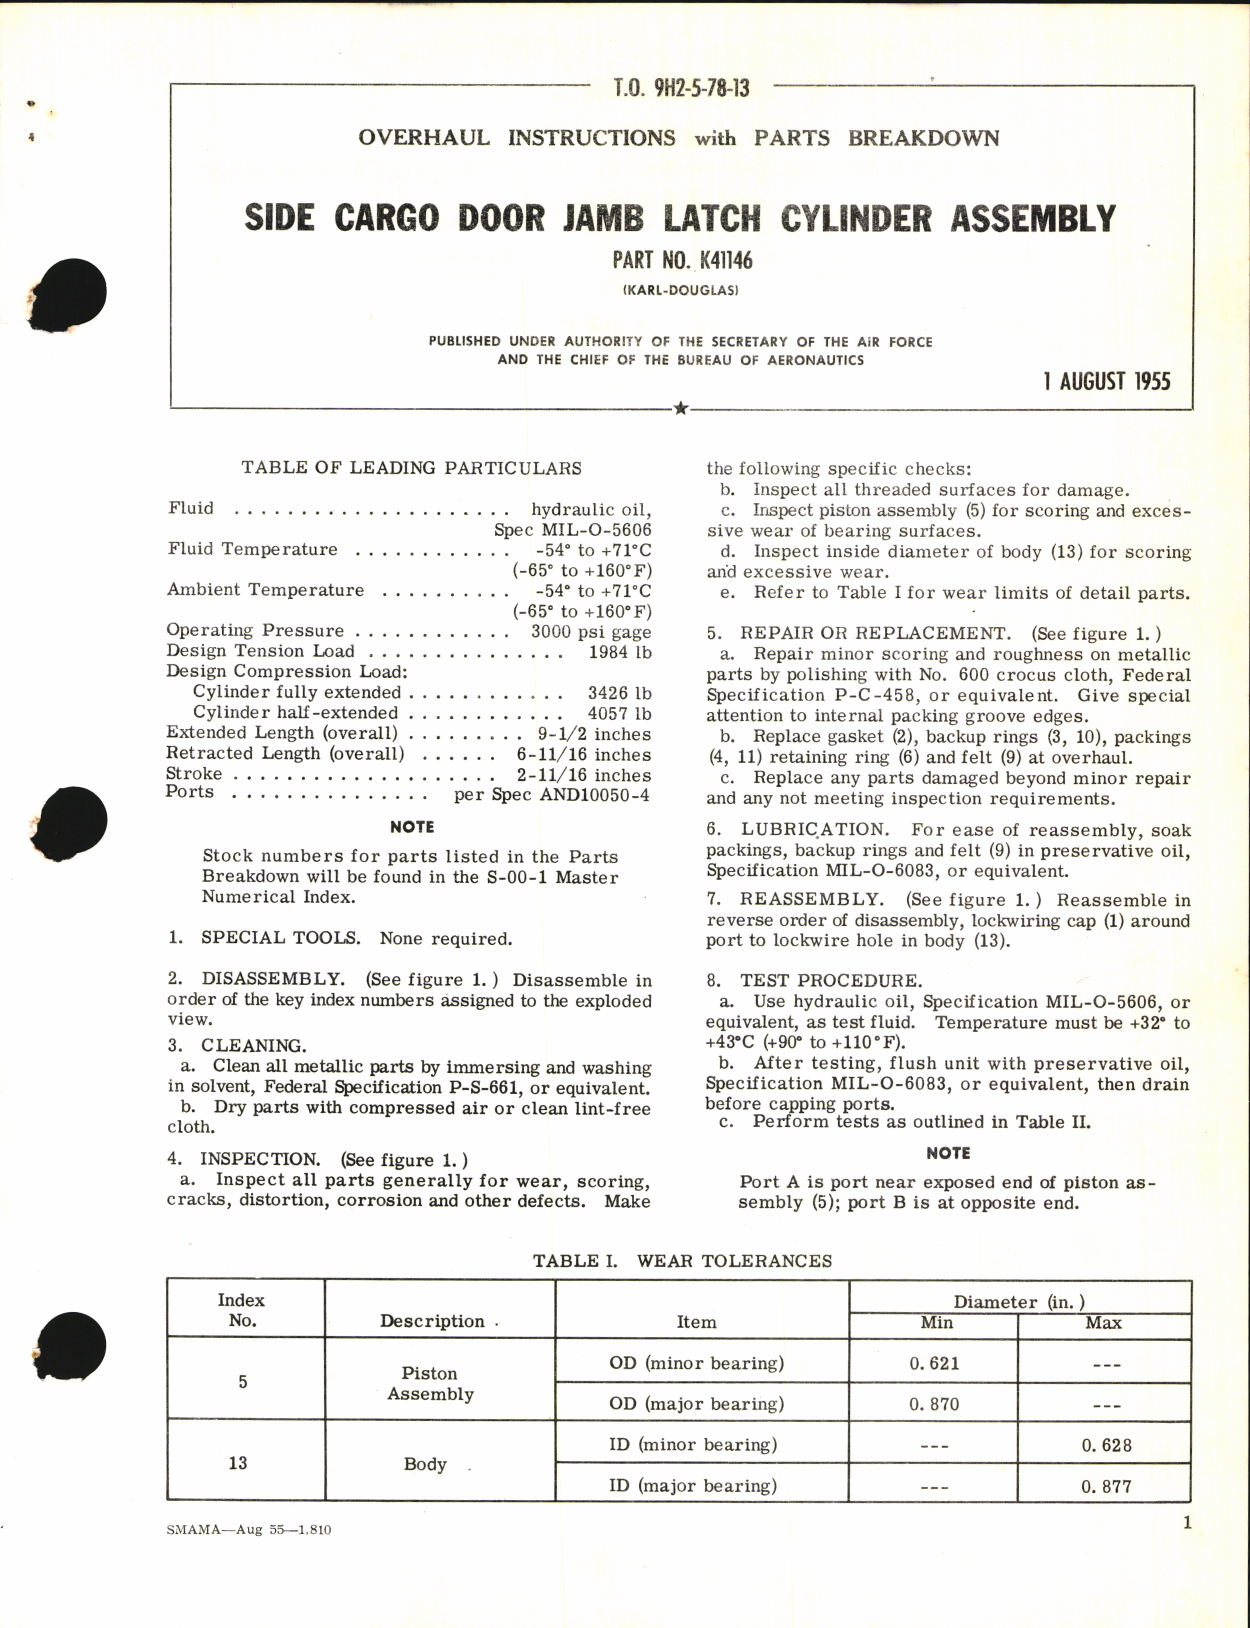 Sample page 1 from AirCorps Library document: Overhaul Instructions with Parts Breakdown for Side Cargo Door Jamb Latch Cylinder Assembly Part No. k41146